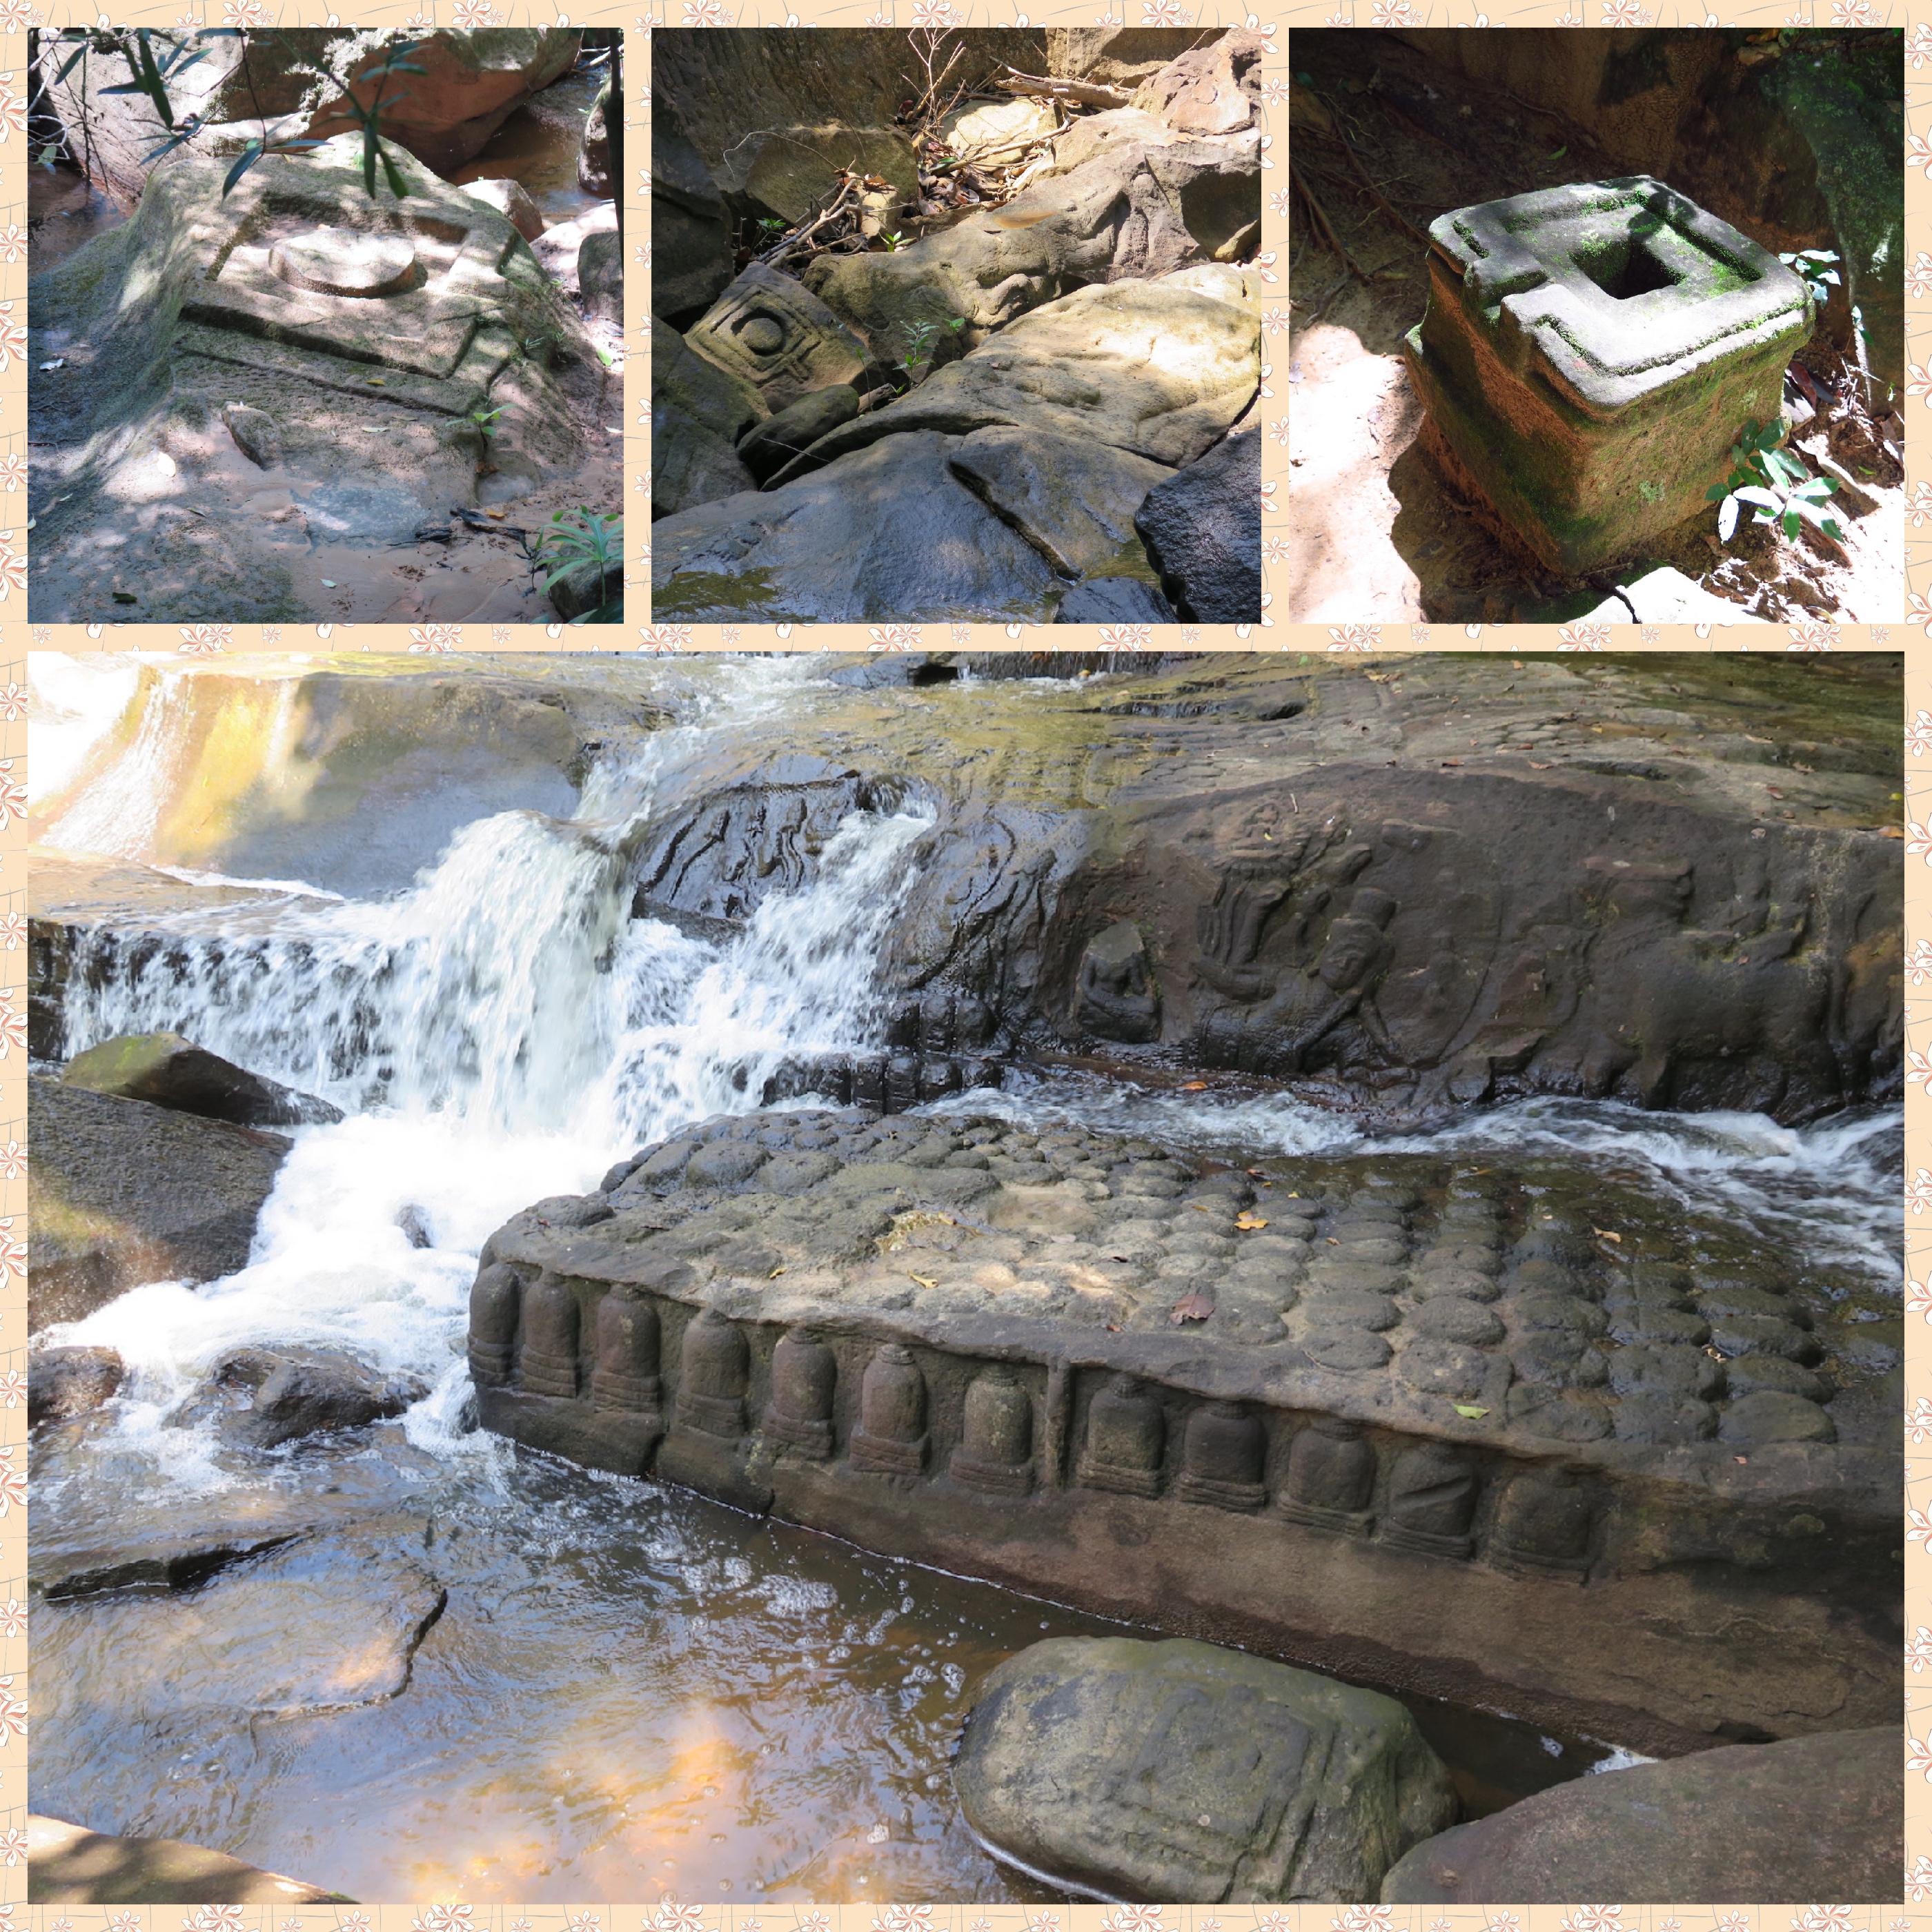 4 images of lingams and snanadronis at various places on the river bed